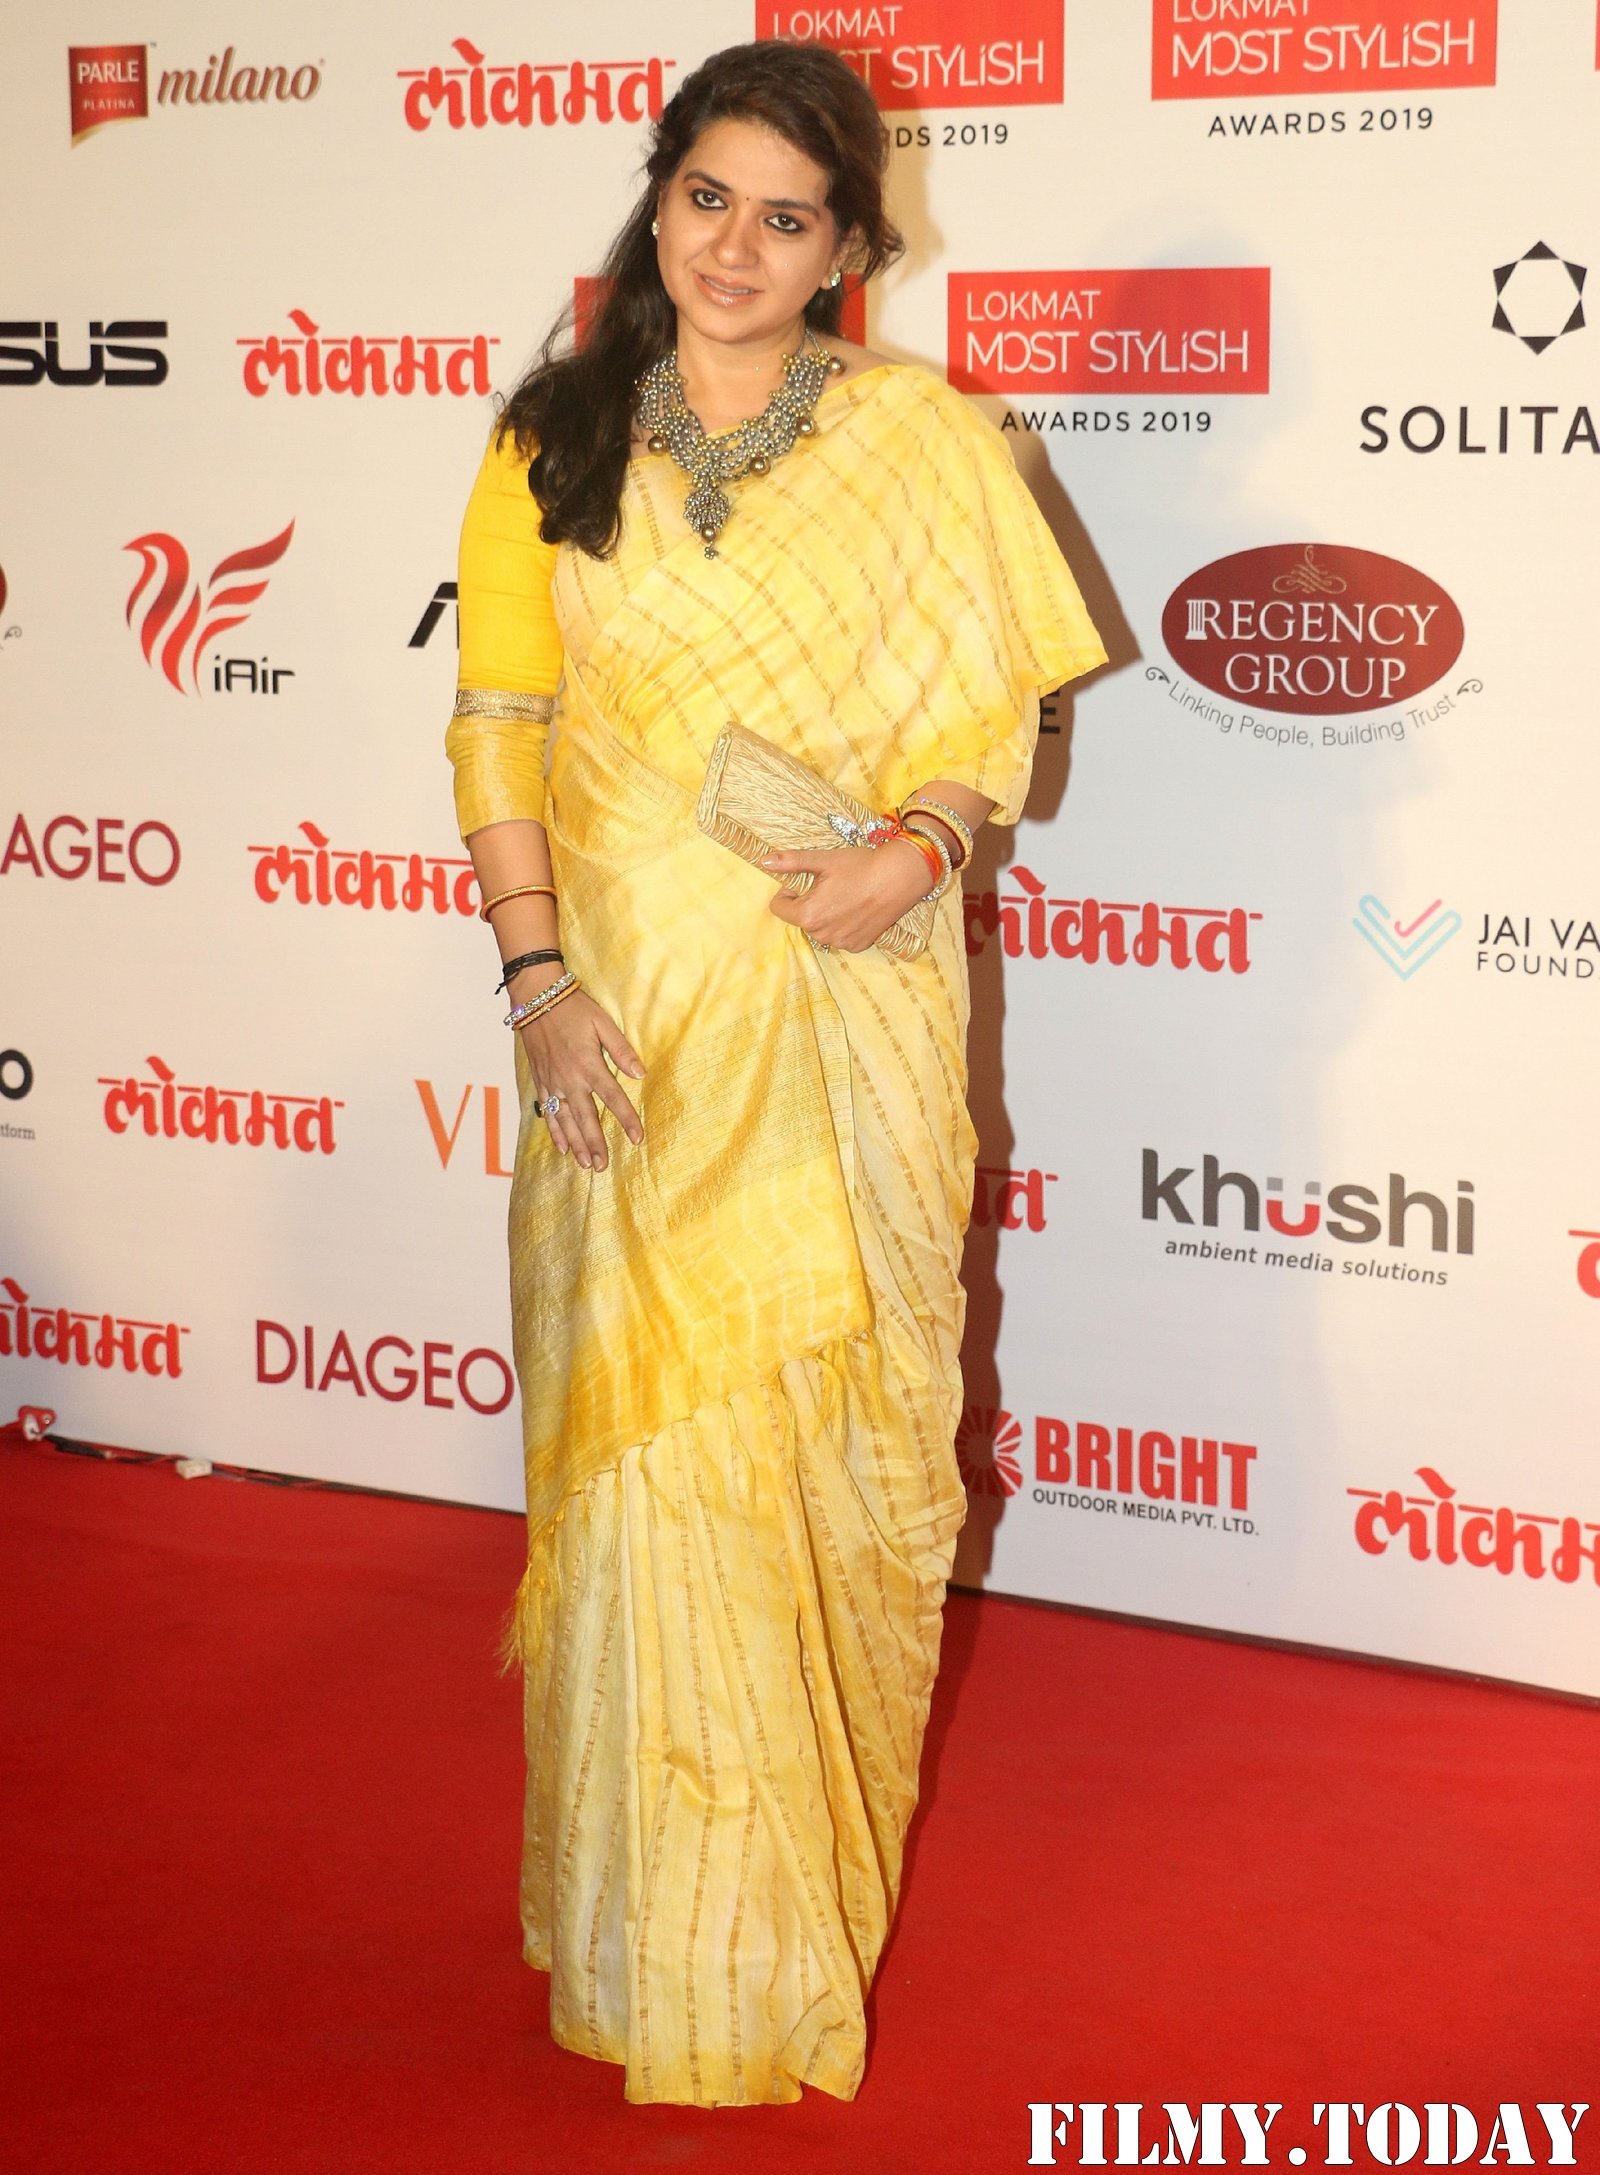 Photos: Lokmat Most Stylish Awards 2019 At The Leela Hotel | Picture 1709582